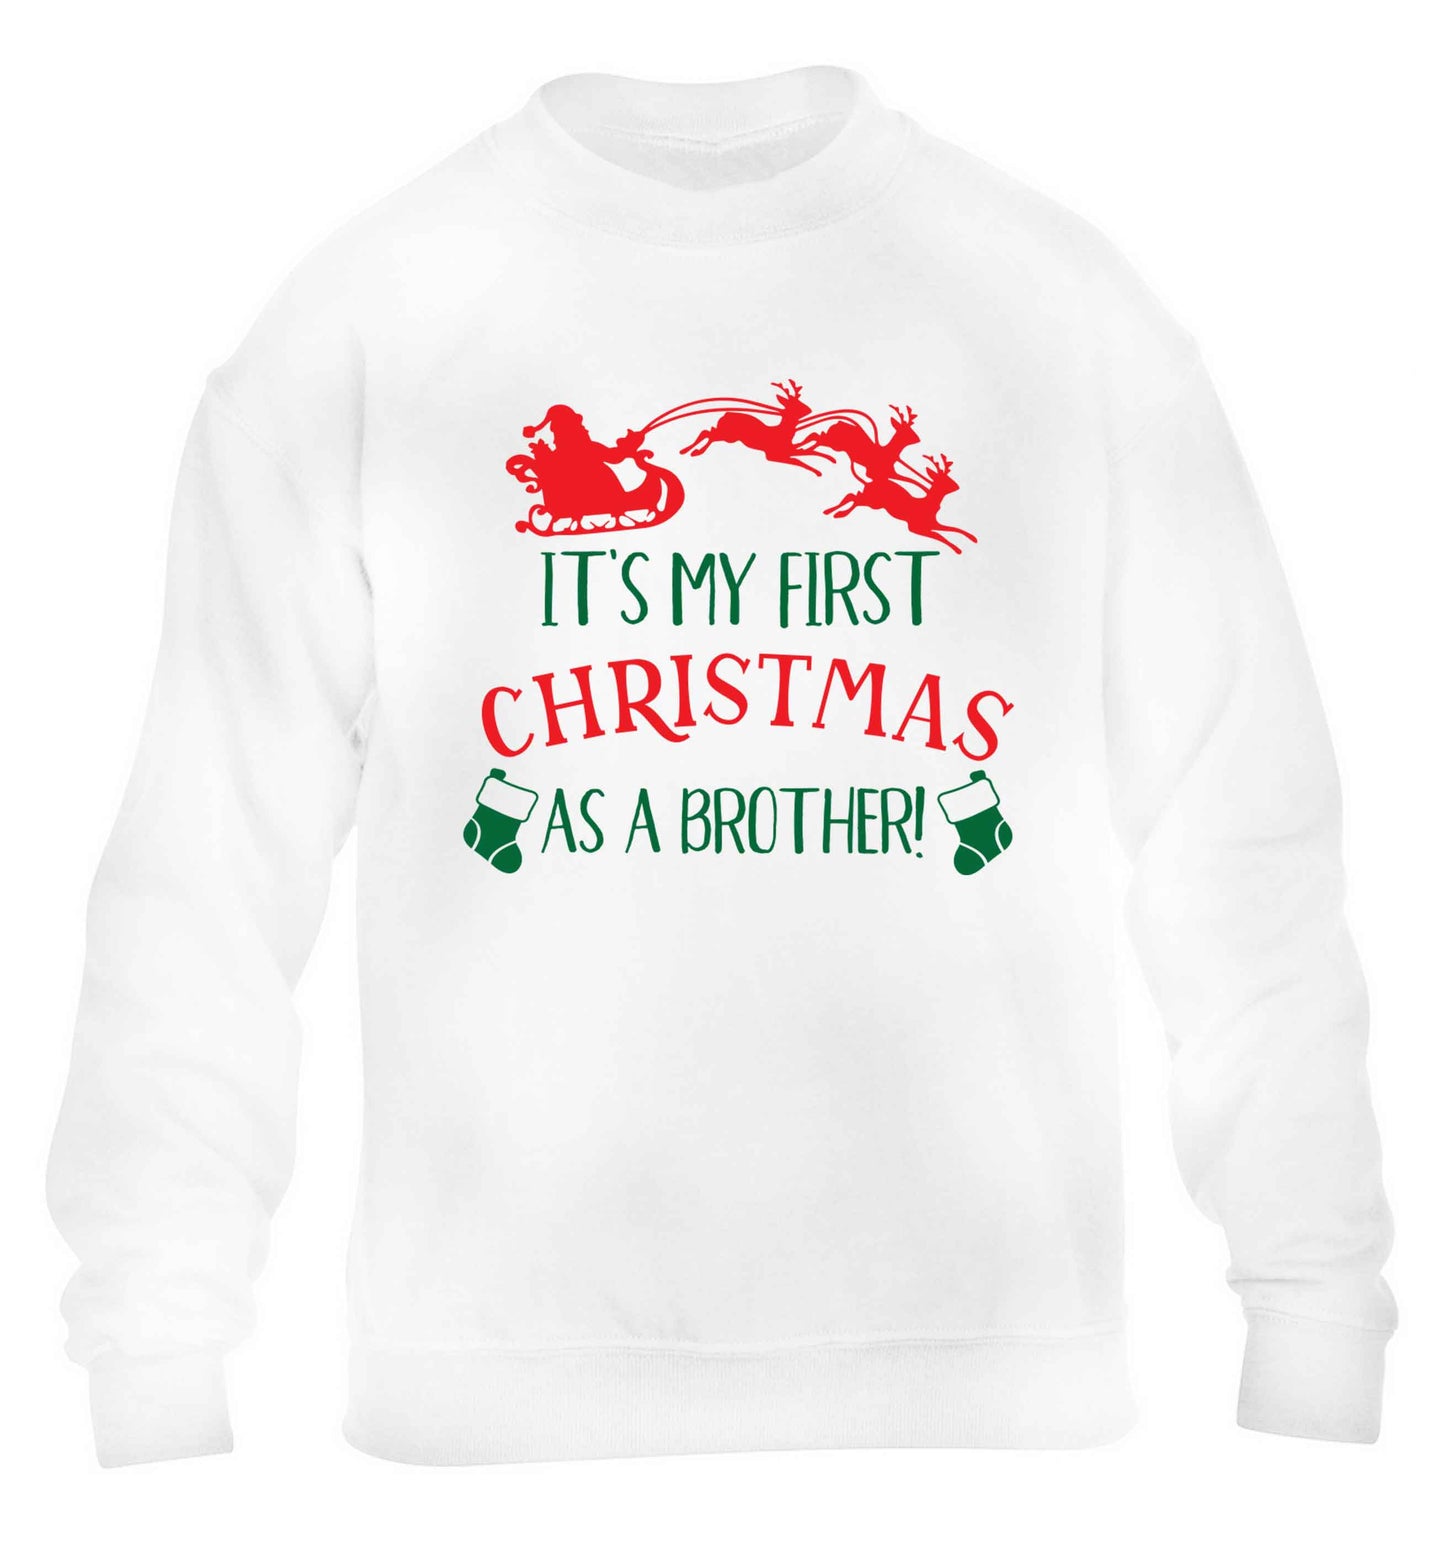 It's my first Christmas as a brother! children's white sweater 12-13 Years